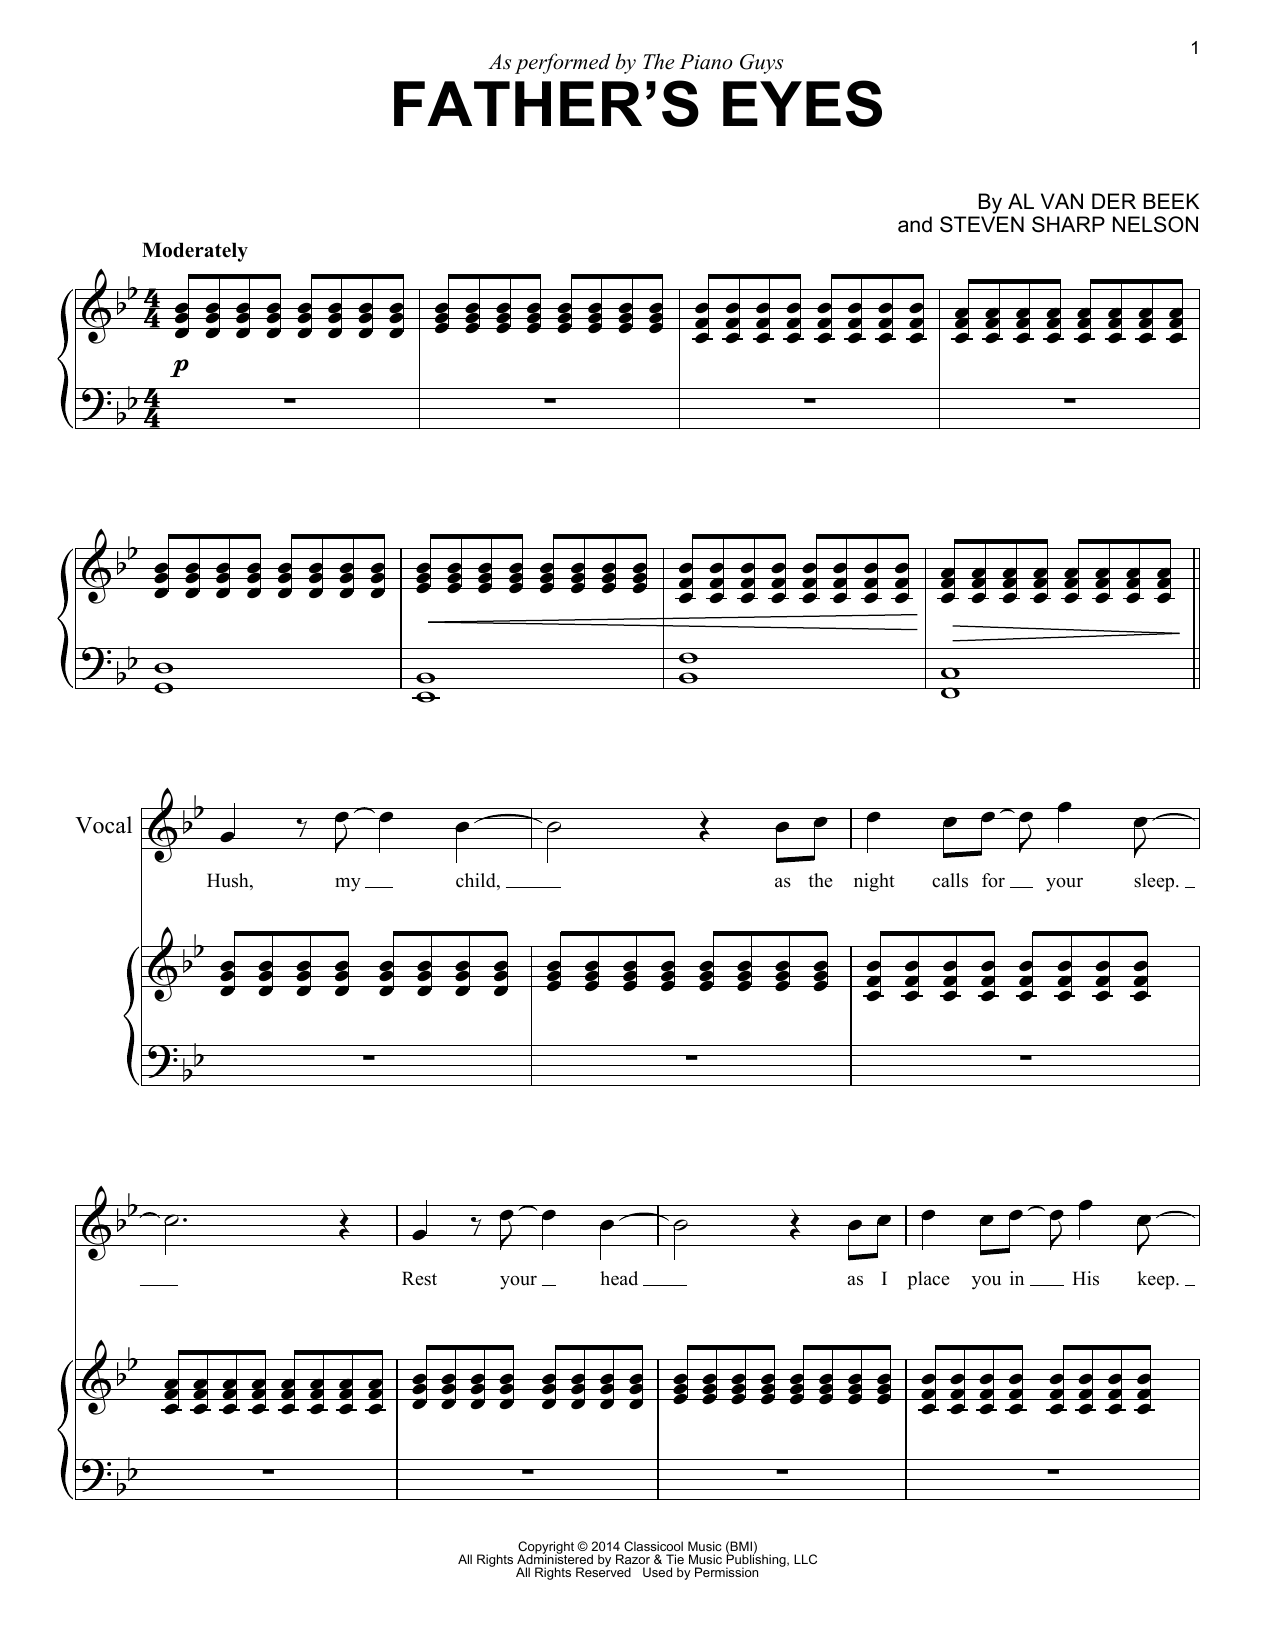 Download The Piano Guys Father's Eyes Sheet Music